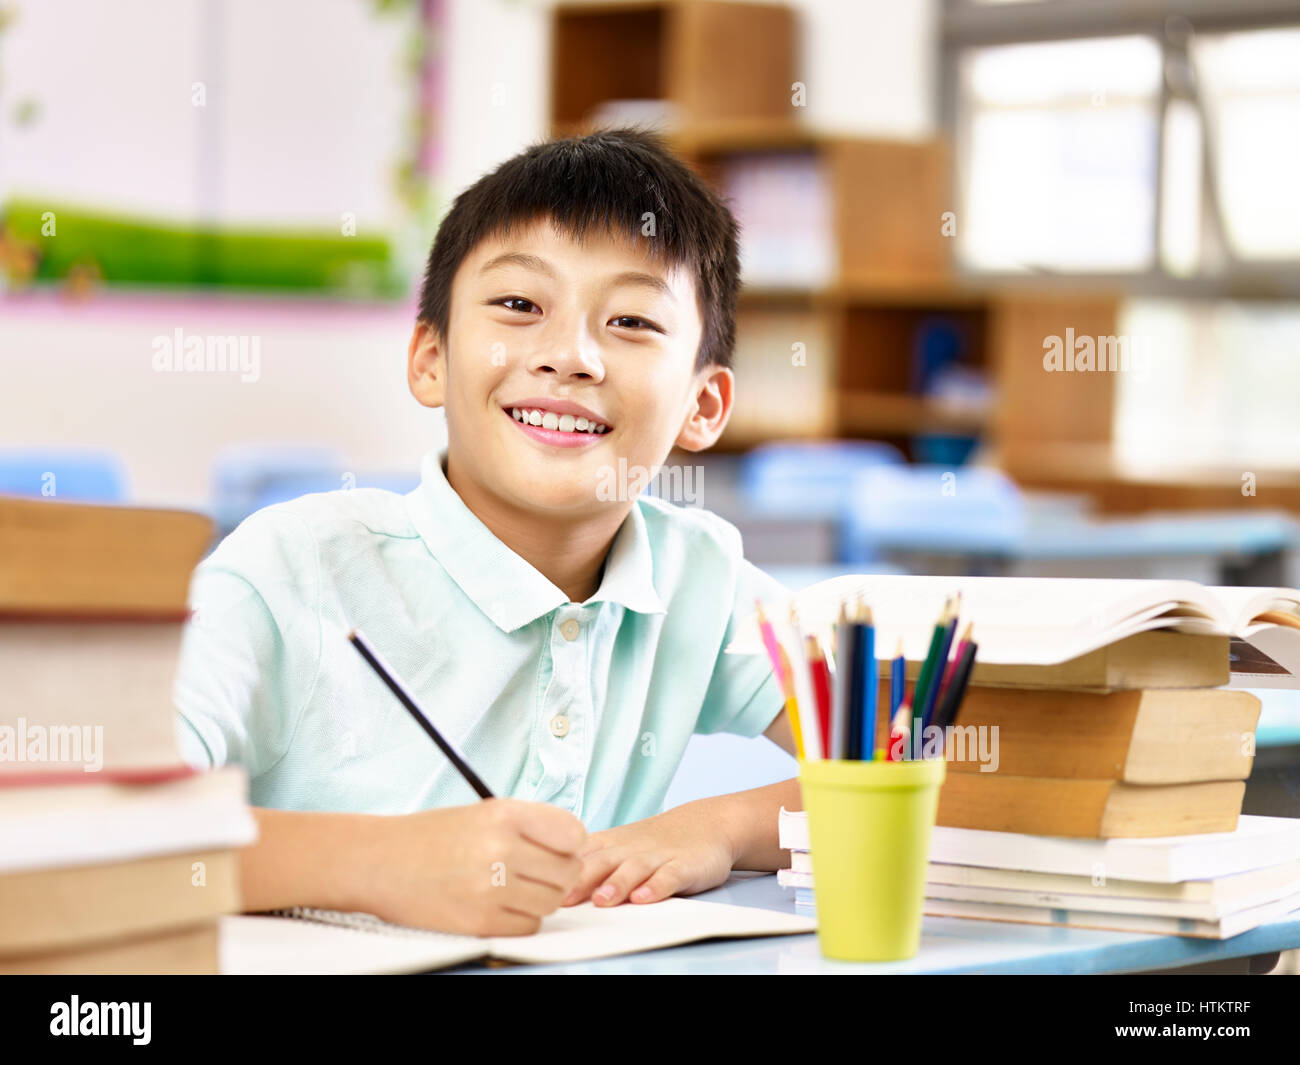 asian primary school student looking at camera smiling while studying in classroom. Stock Photo